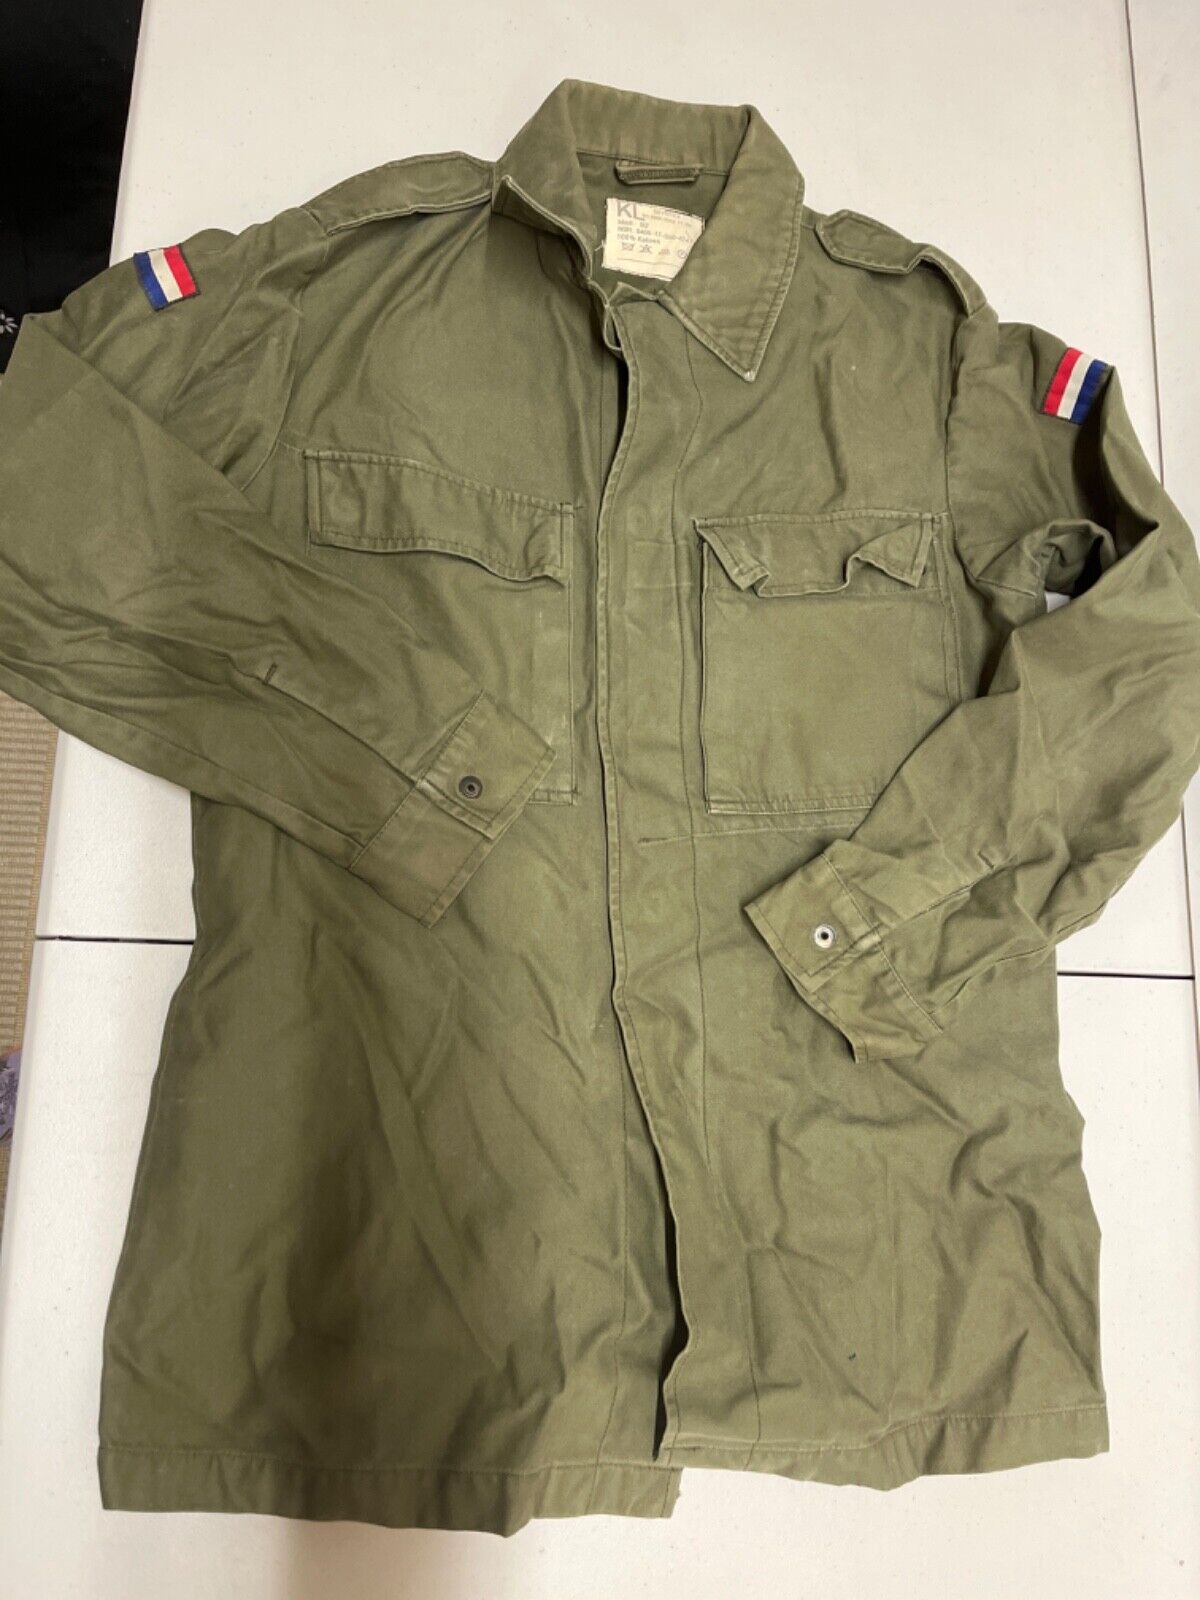 Vintage French Military Shirt